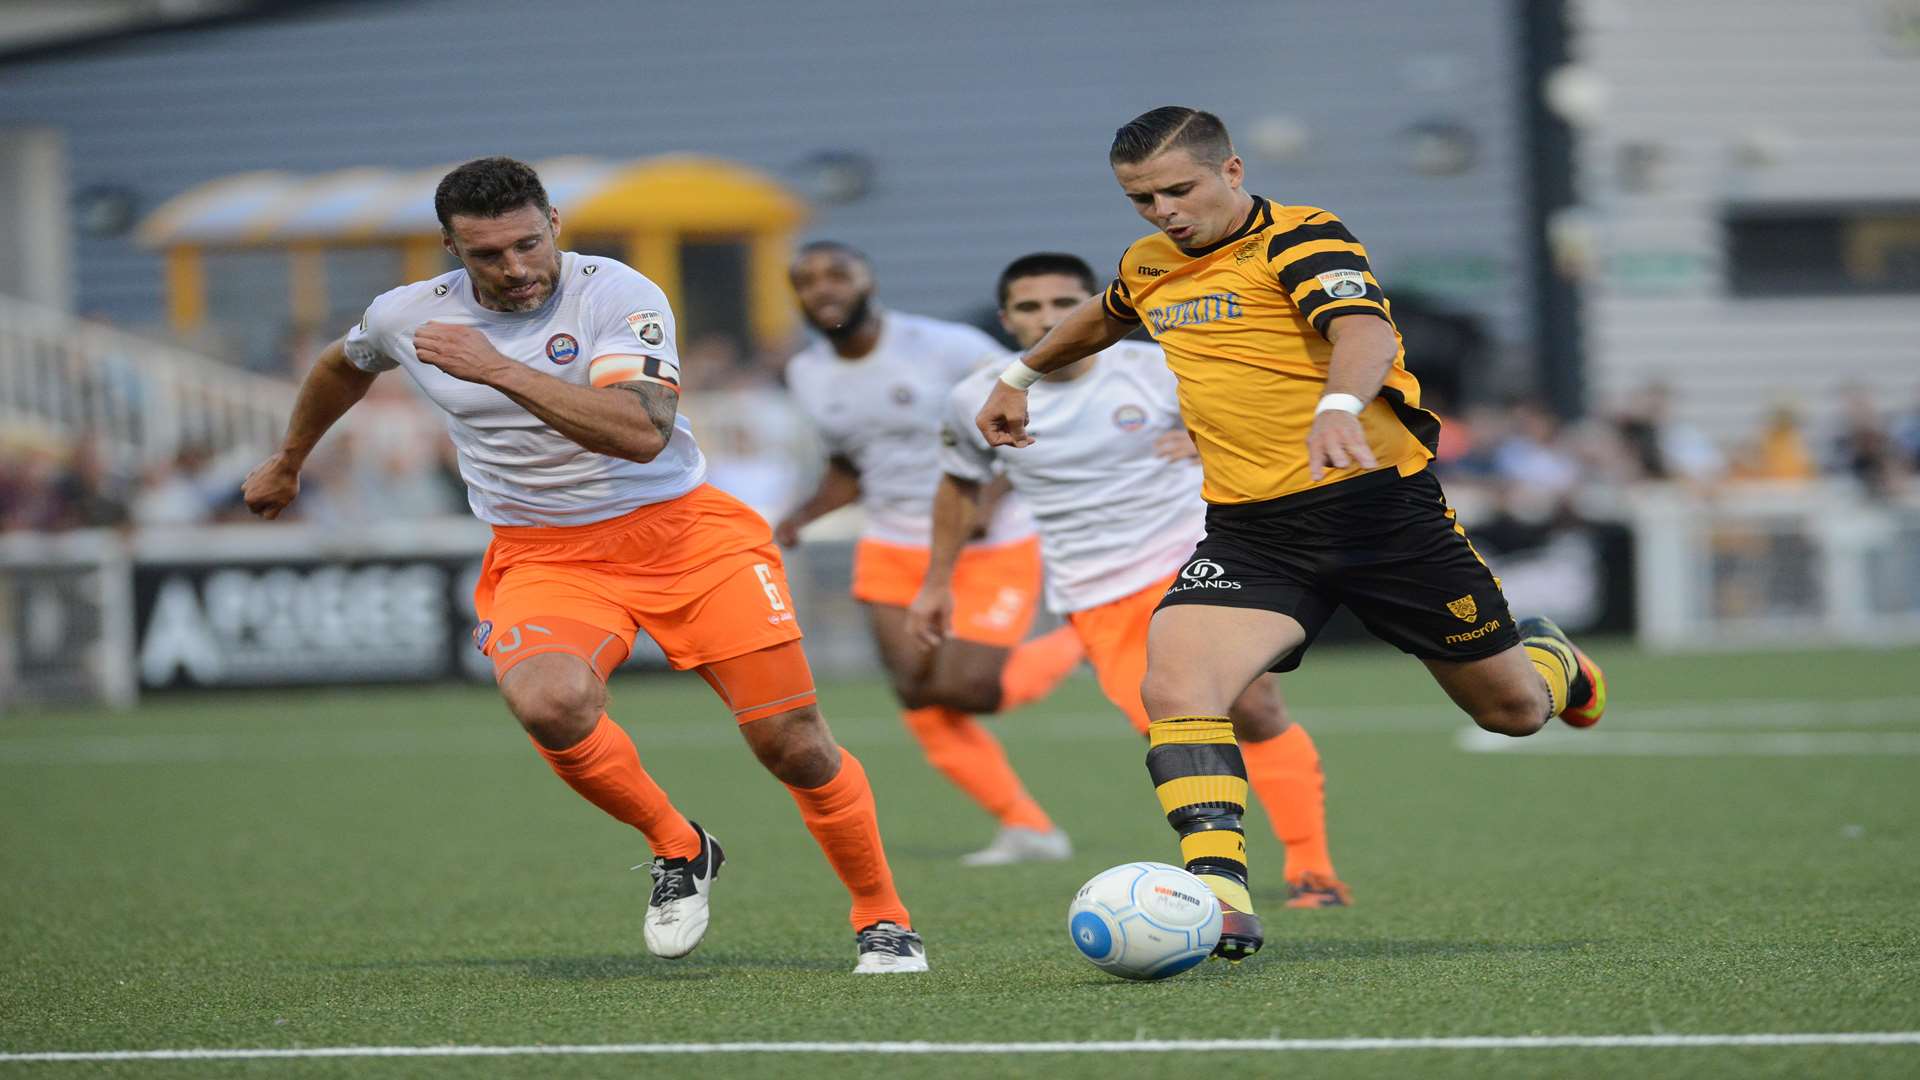 Ben Greenhalgh in action for Maidstone Picture: Gary Browne